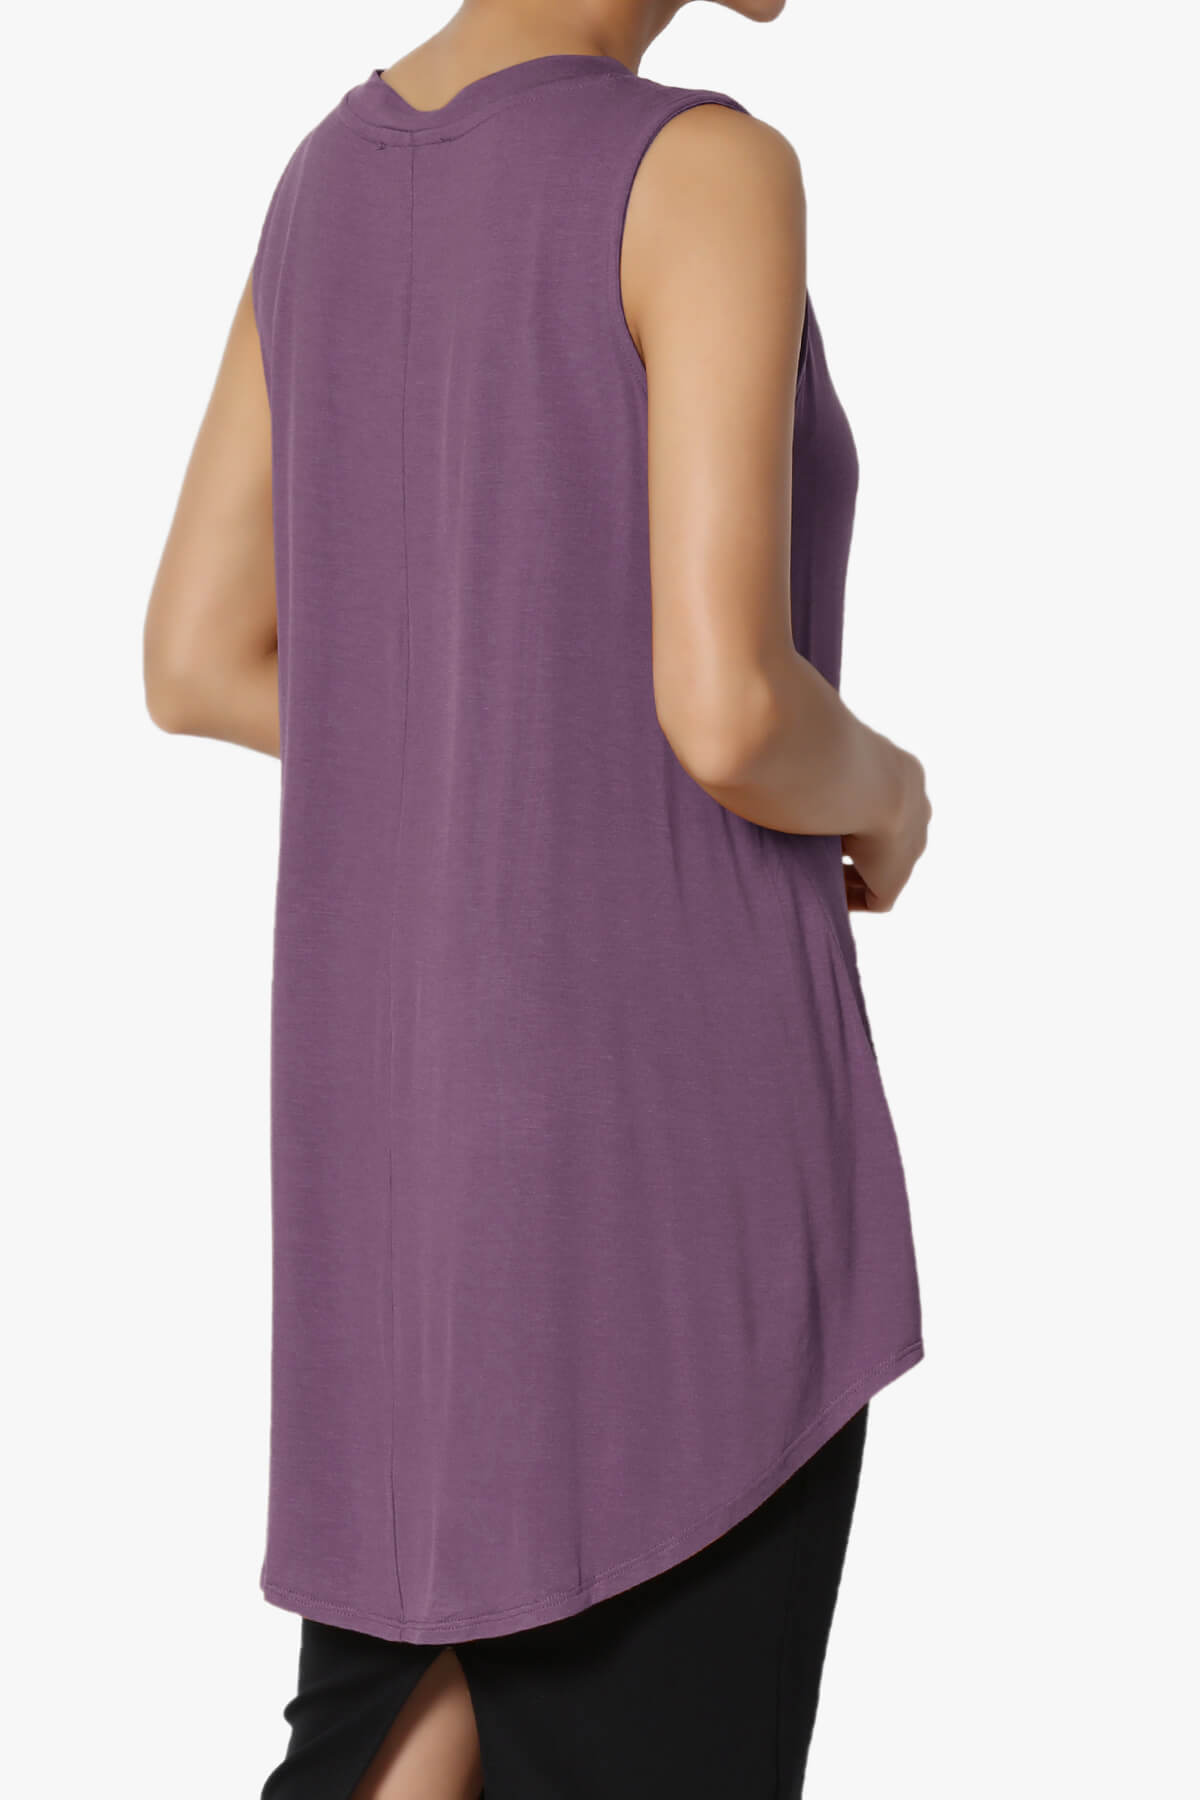 Load image into Gallery viewer, Myles Sleeveless V-Neck Luxe Jersey Top DUSTY PLUM_4
